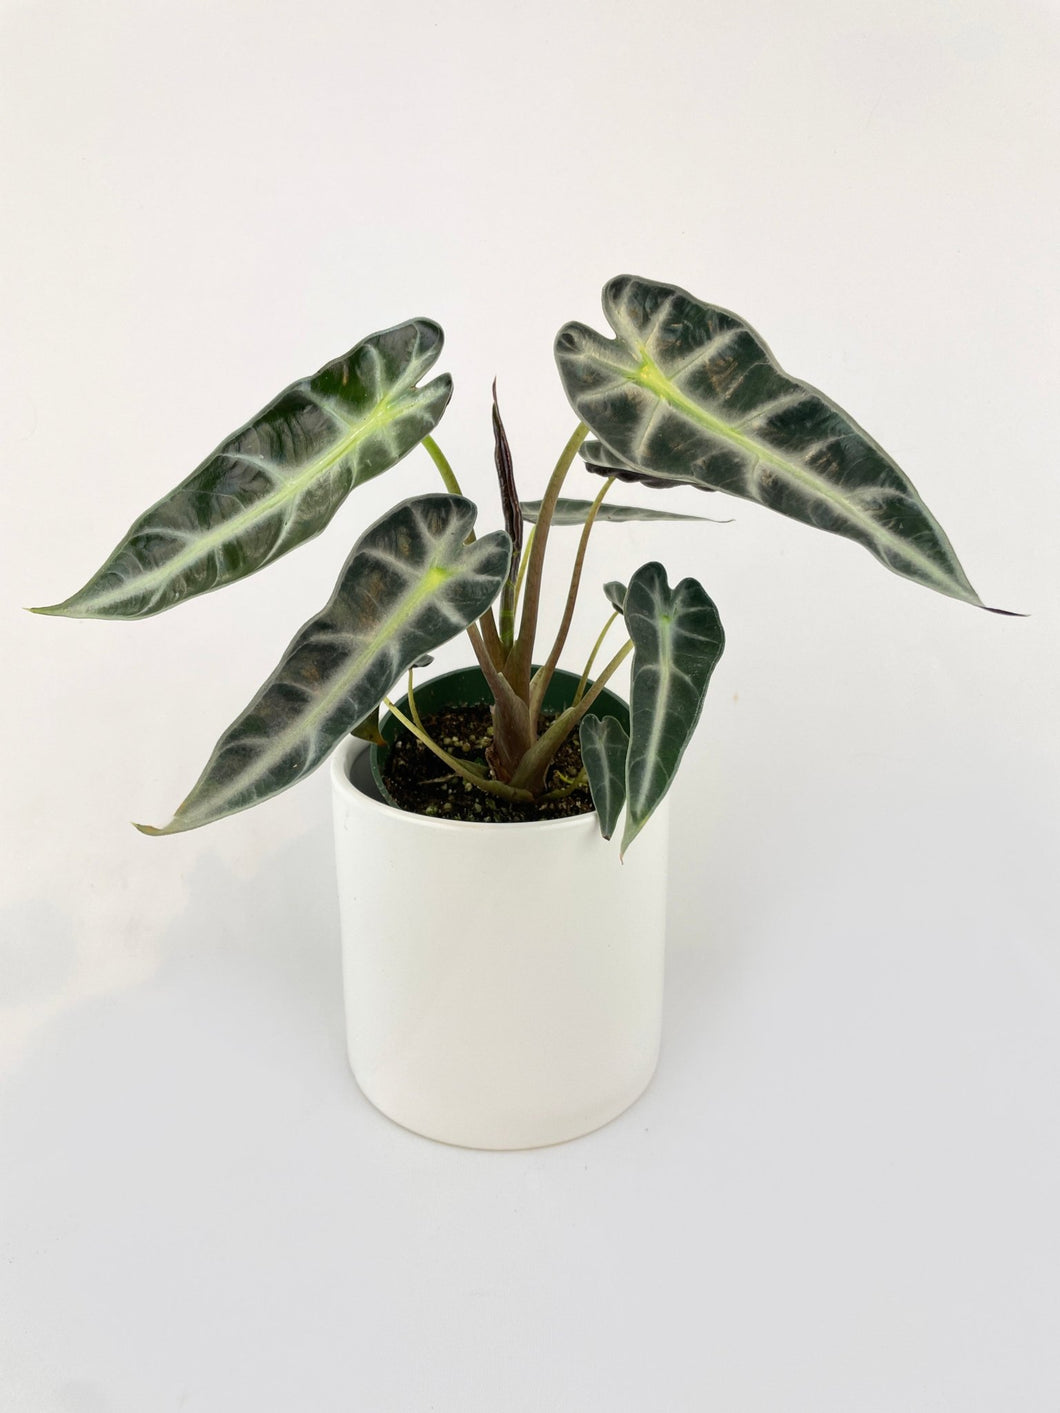 Bumble Plants - Alocasia Bambino Arrow Plant by Bumble Plants - | Delivery near me in ... Farm2Me #url#